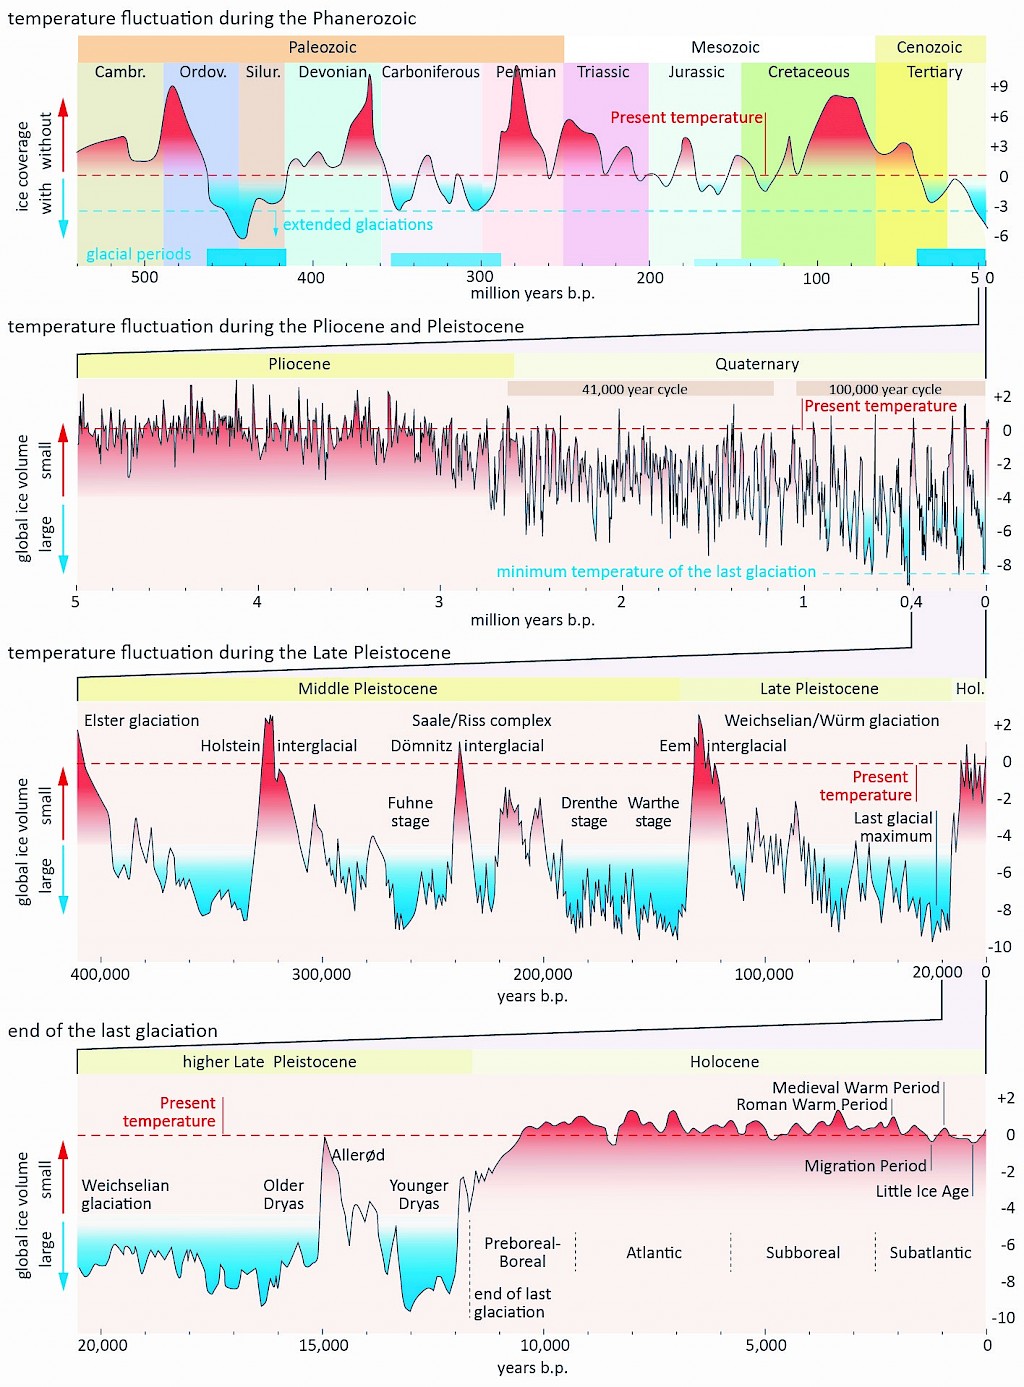 Global climate fluctuations and glacial periods in Earth’s history / from: Meschede (2015)